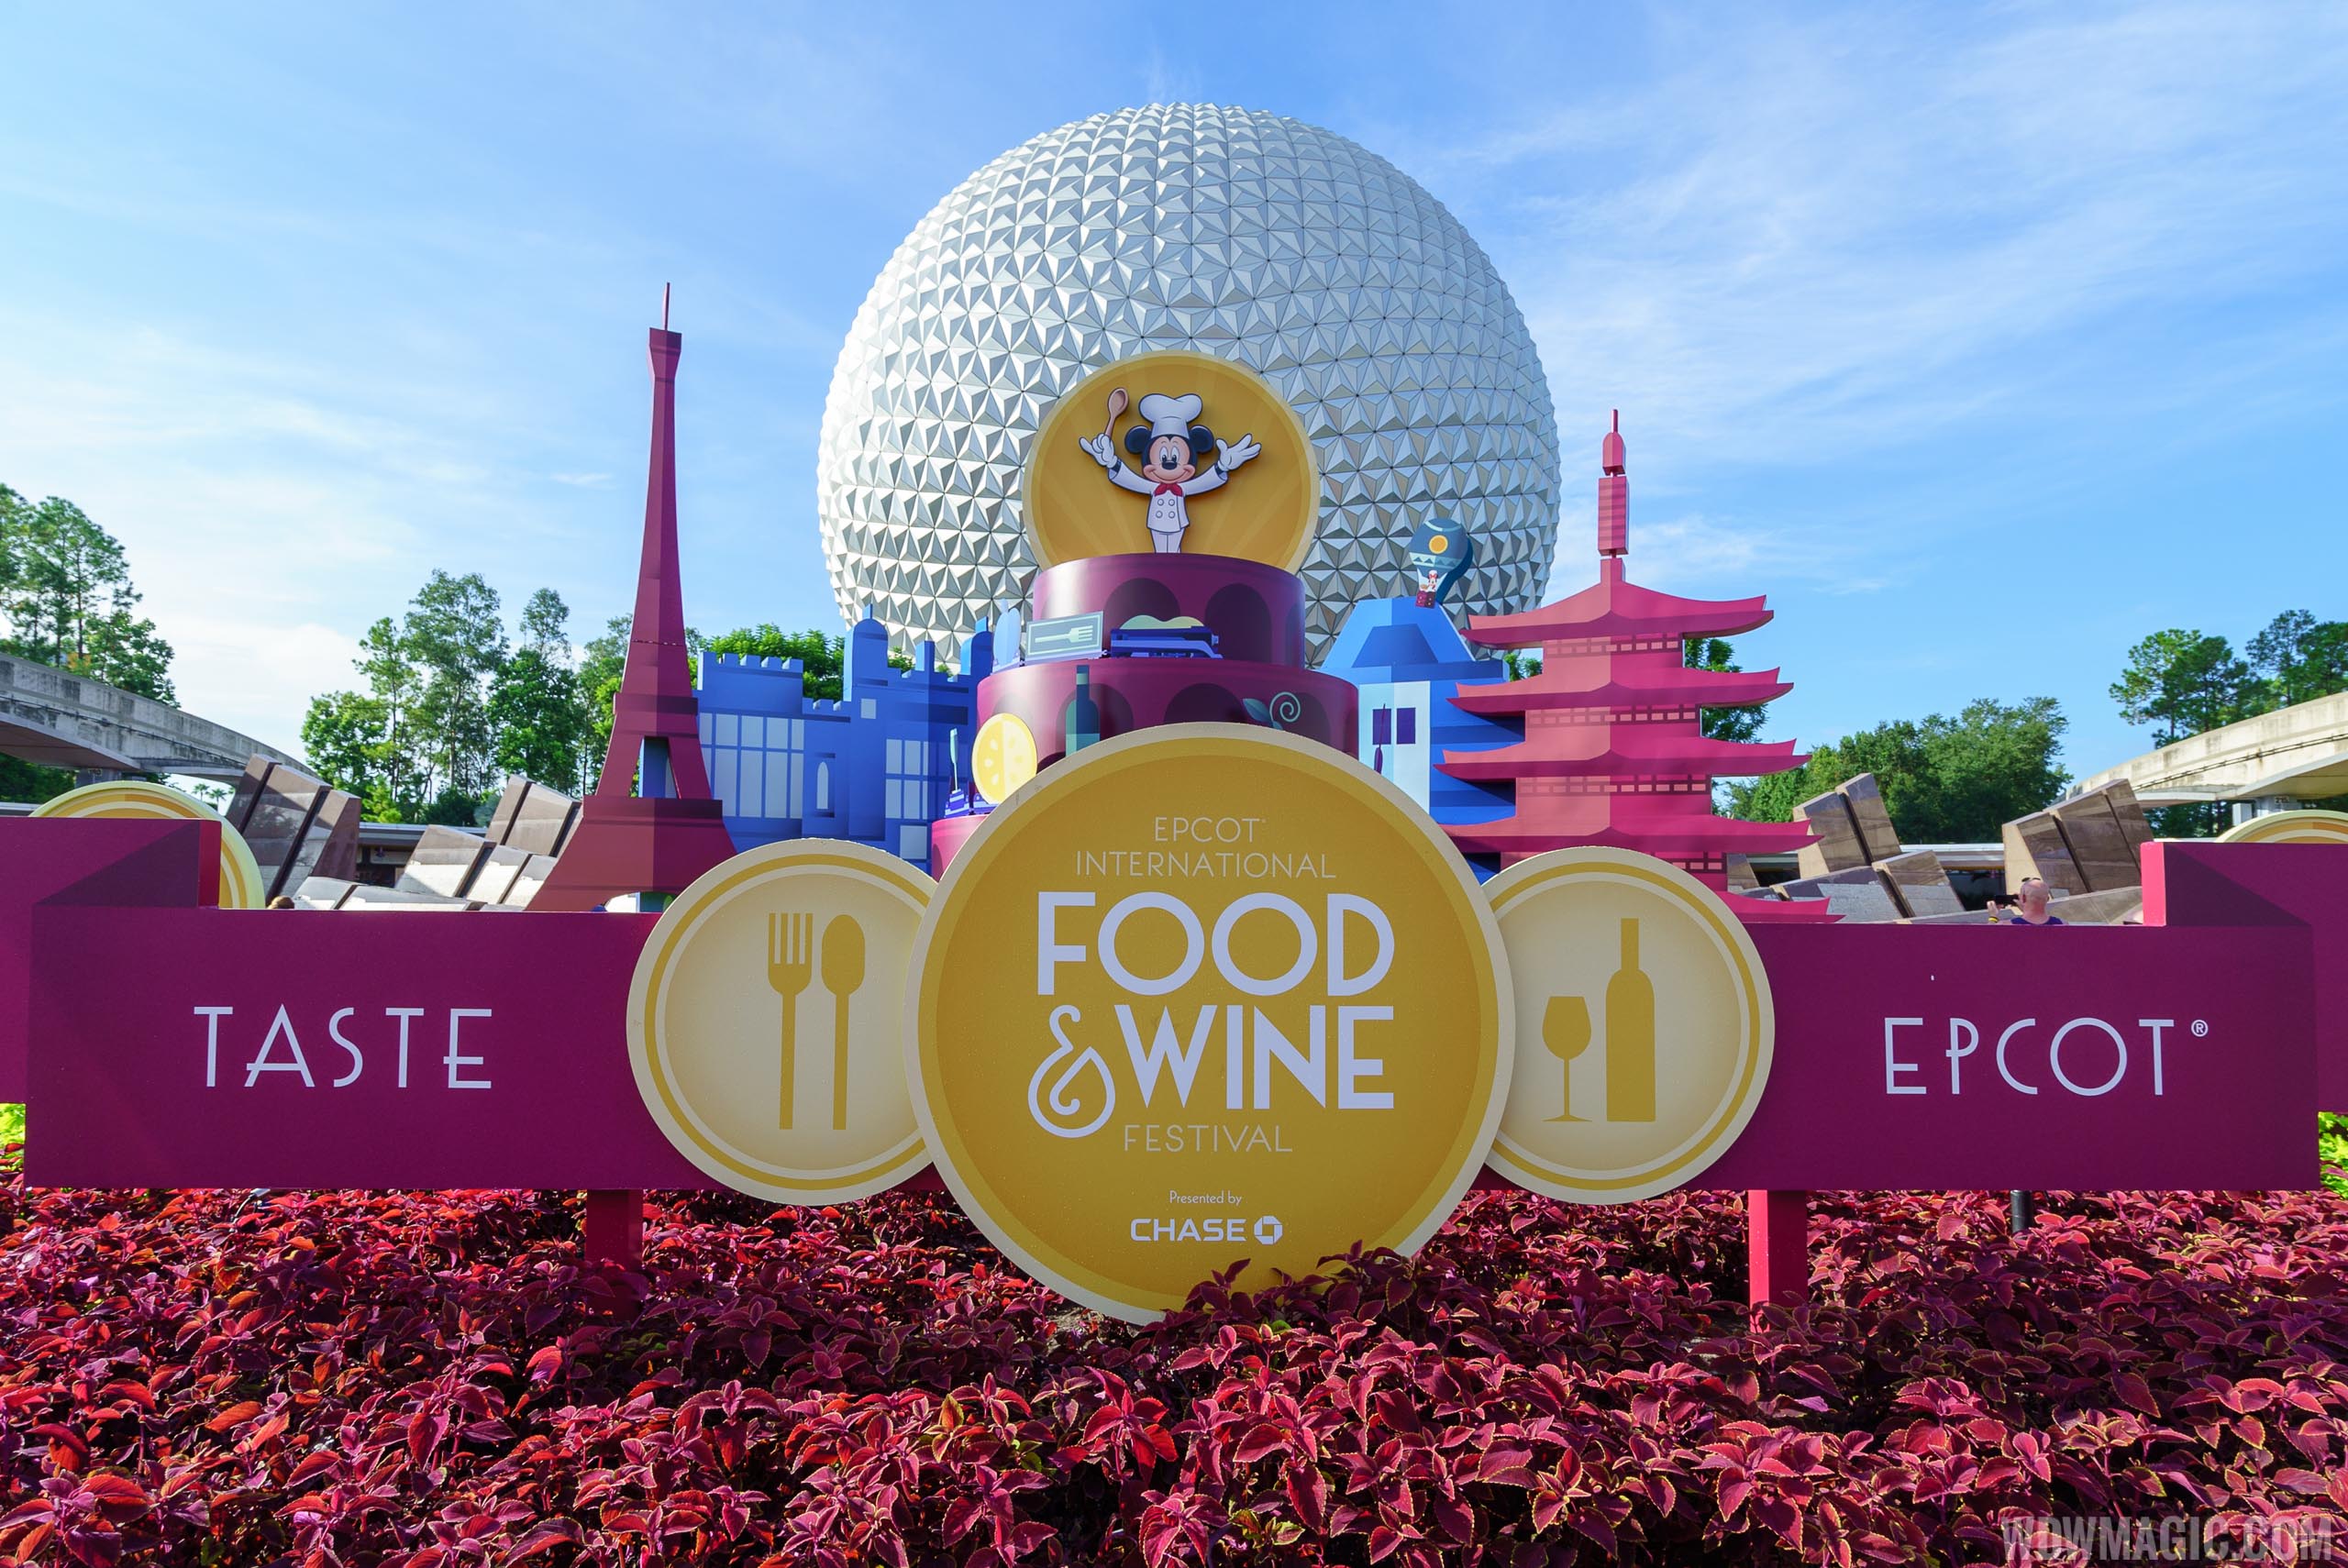 2019 epcot food and wine maps